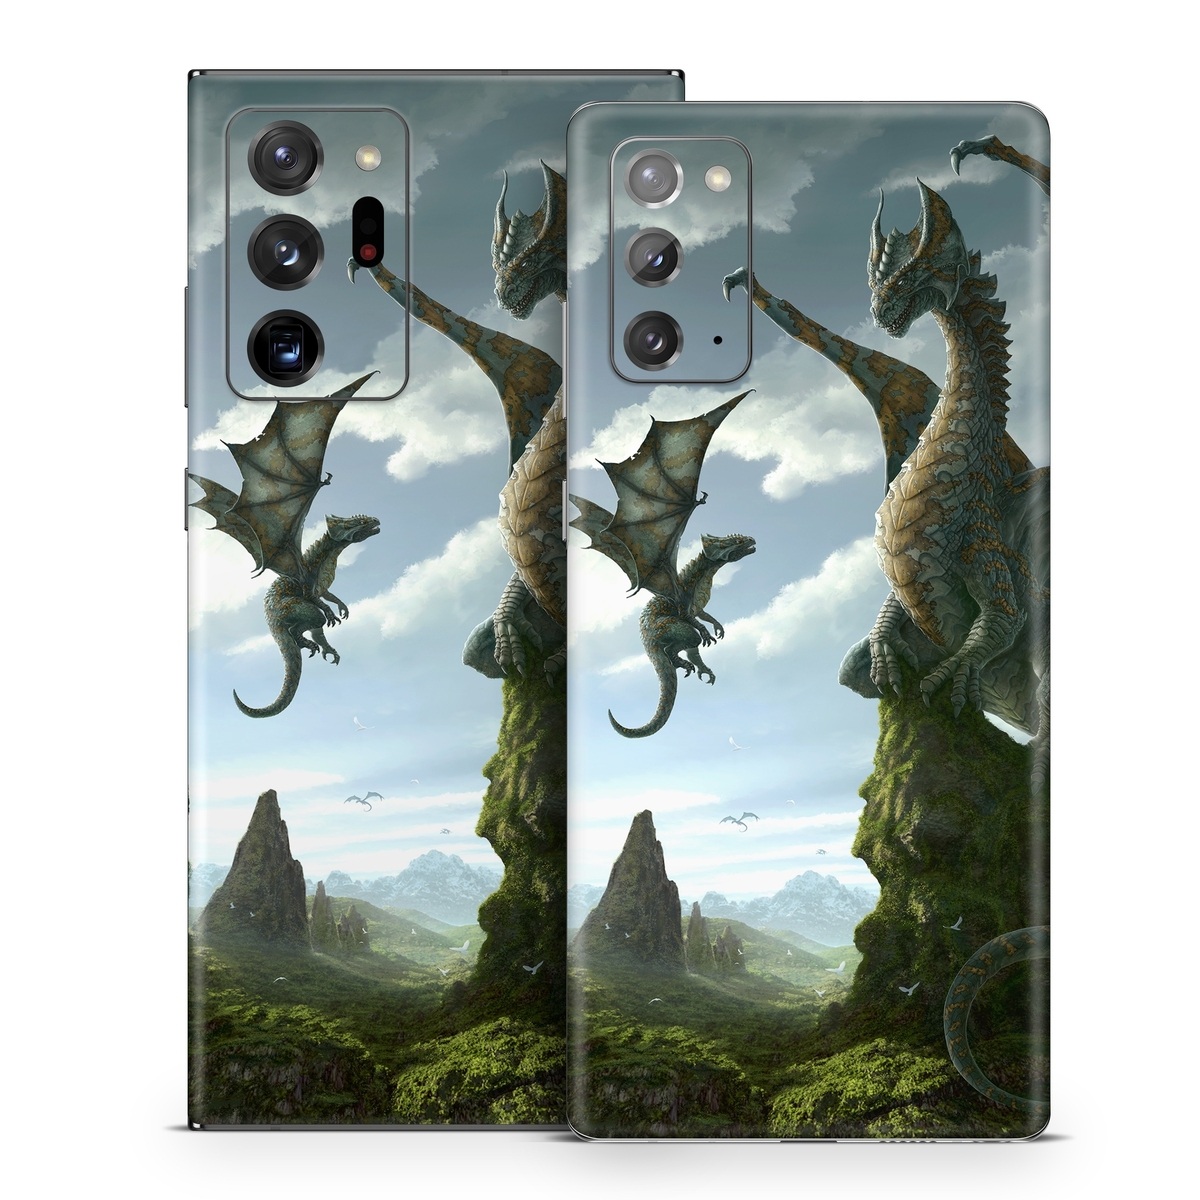 Samsung Galaxy Note 20 Series Skin design of Dragon, Cg artwork, Fictional character, Mythical creature, Mythology, Extinction, Cryptid, Illustration, Games, Massively multiplayer online role-playing game, with black, gray, blue, white, purple colors